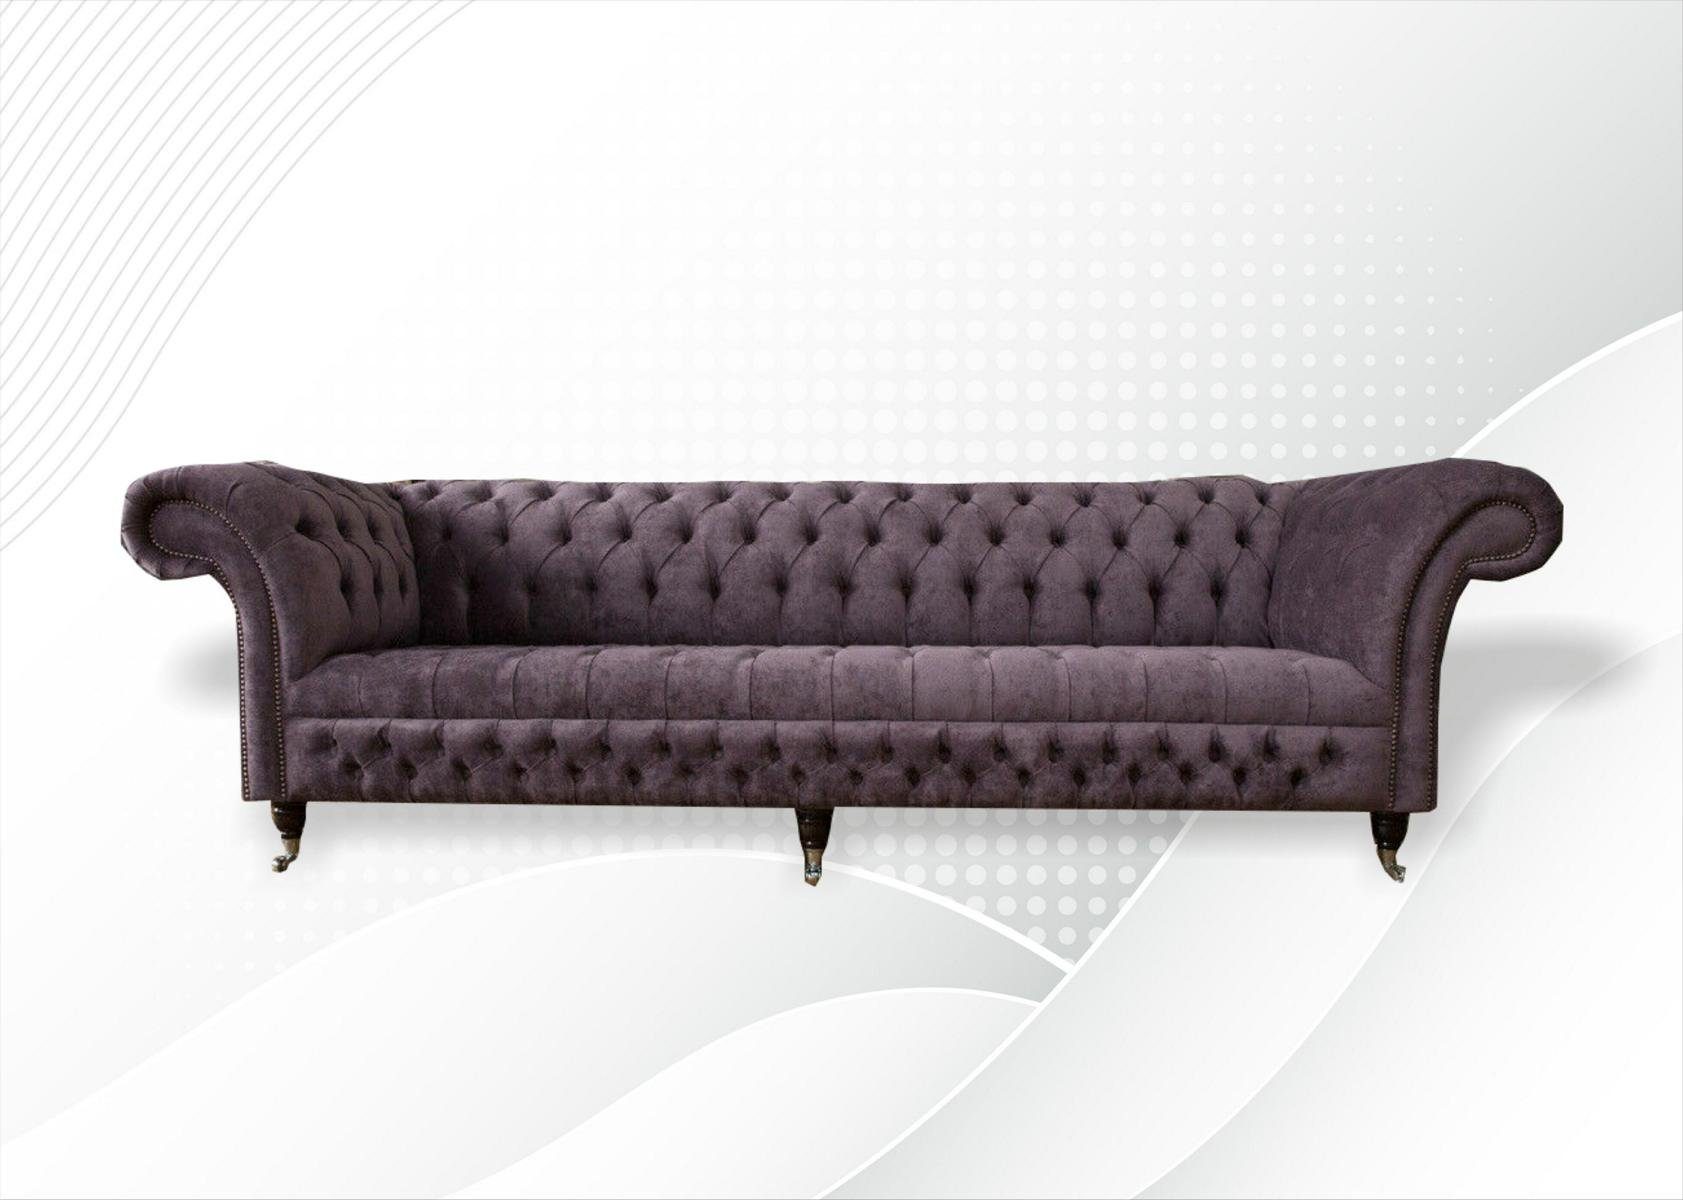 JVmoebel Sofa xxl Big Sofa Couch Chesterfield 265cm Polster Sofas 4 Sitzer Leder, Made in Europe